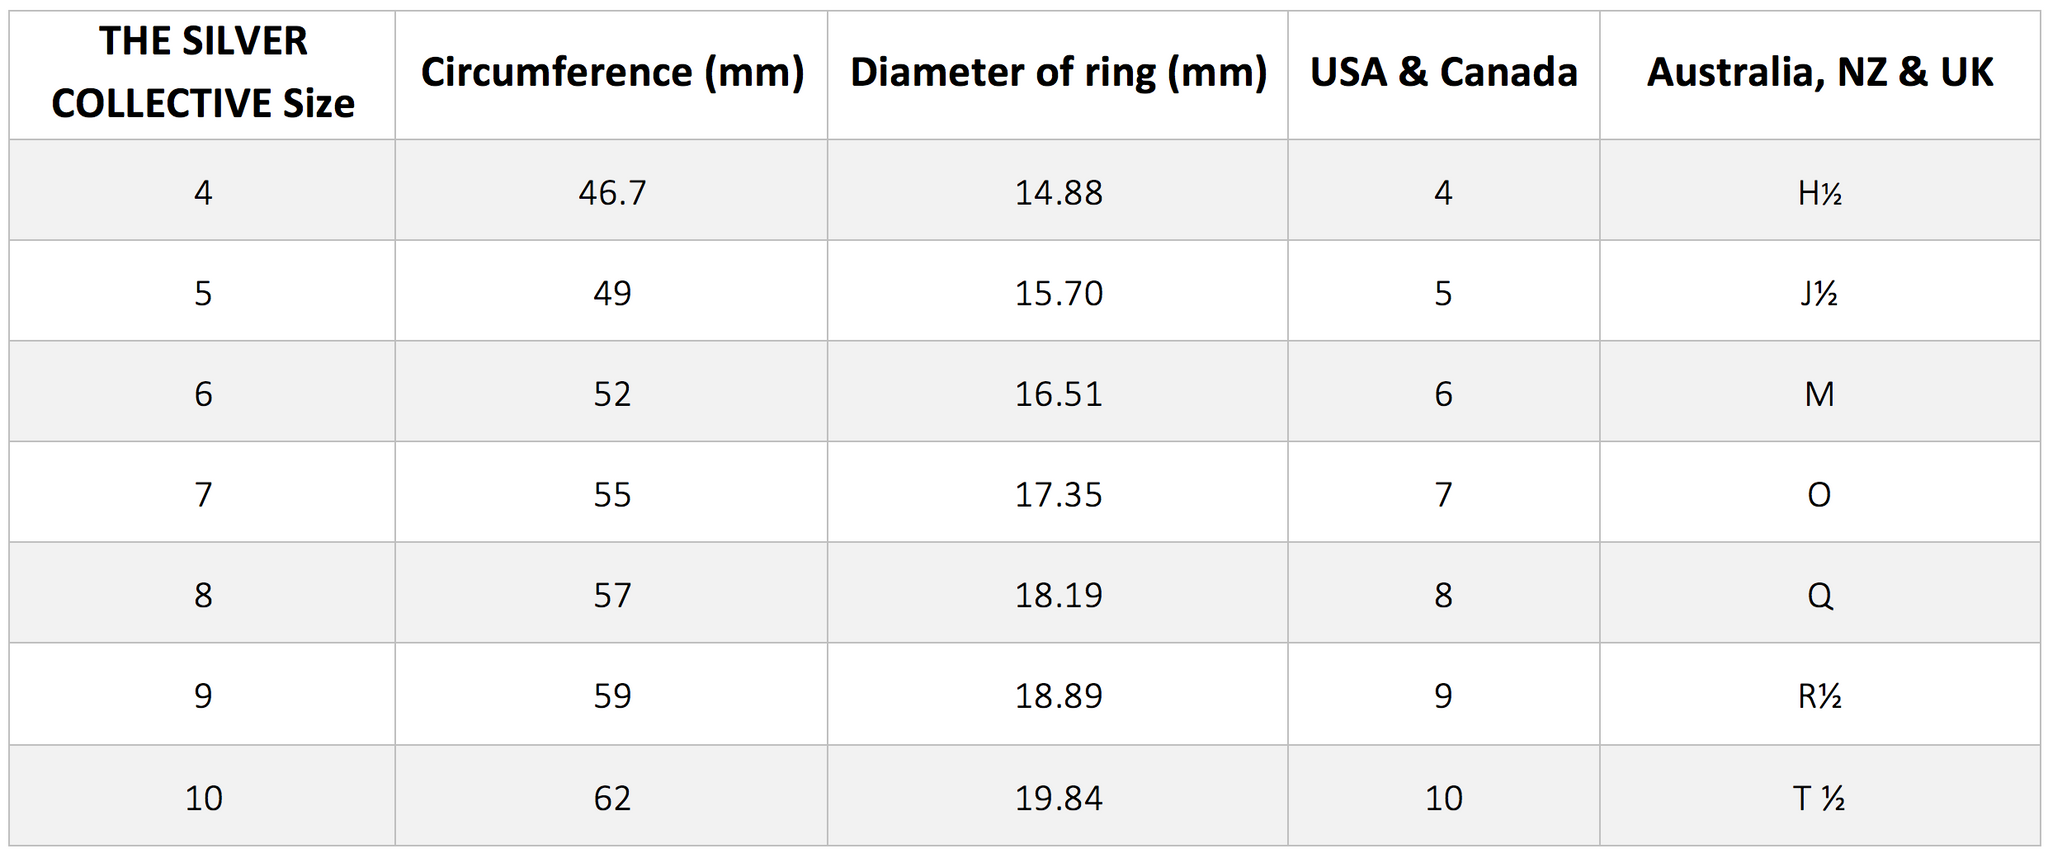 Uk To American Ring Size Chart